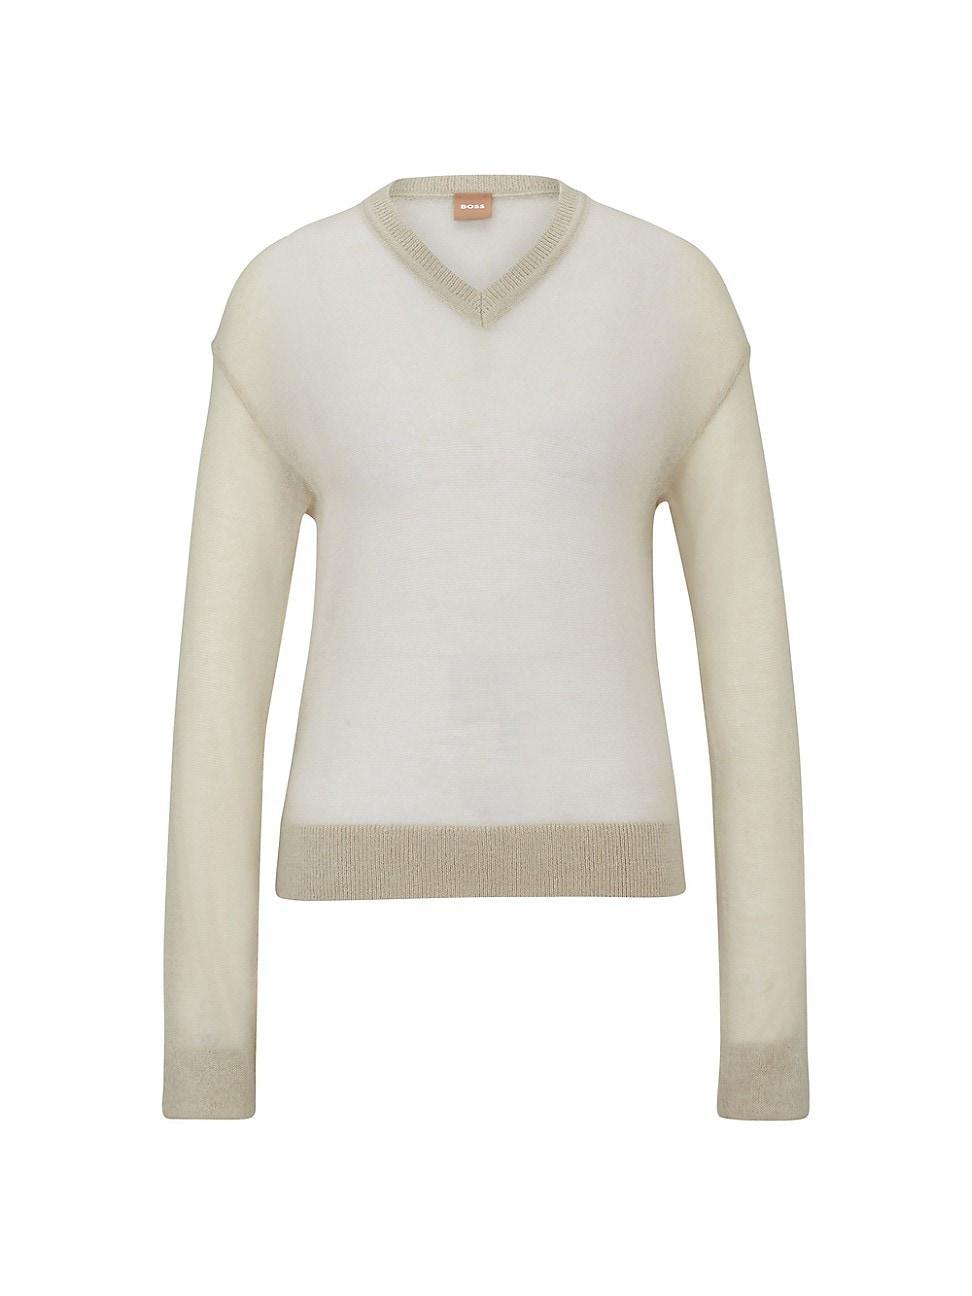 Womens V-Neck Sweater in a Sheer Knit Product Image